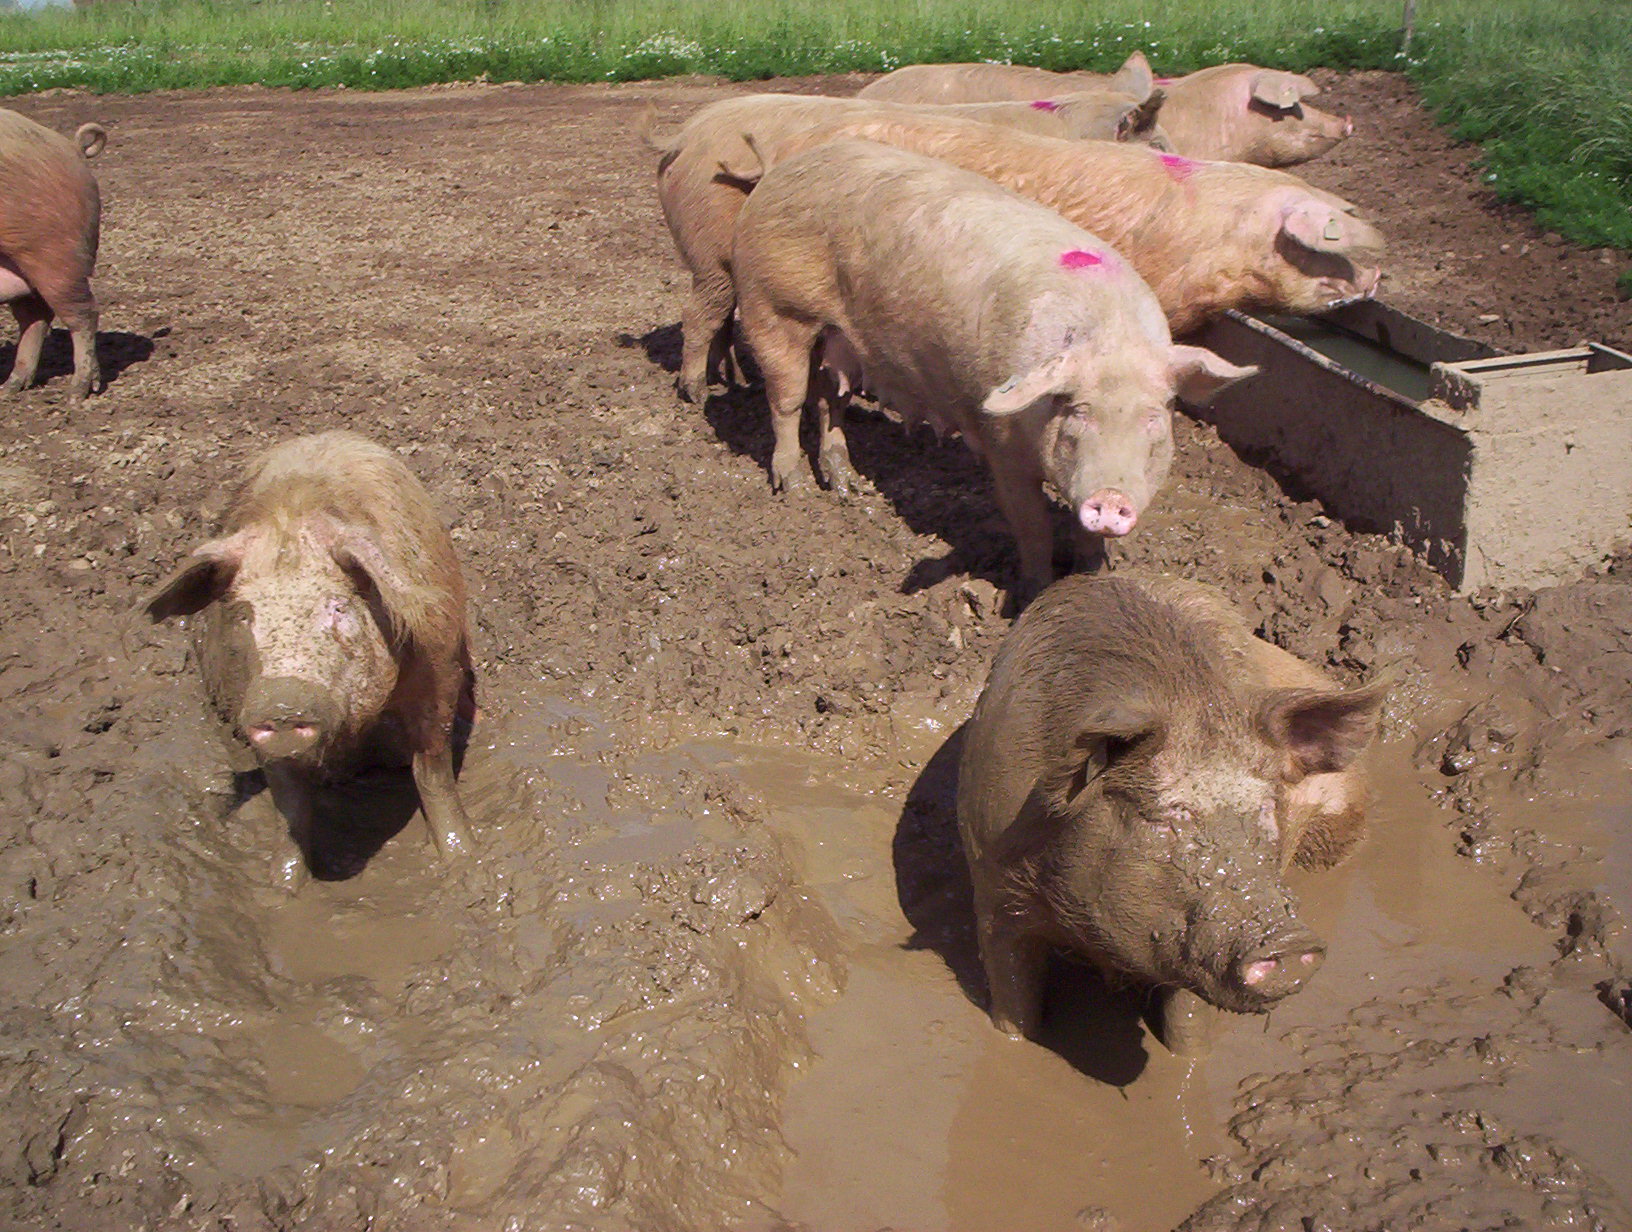 Pigs in a wallow covered in mud